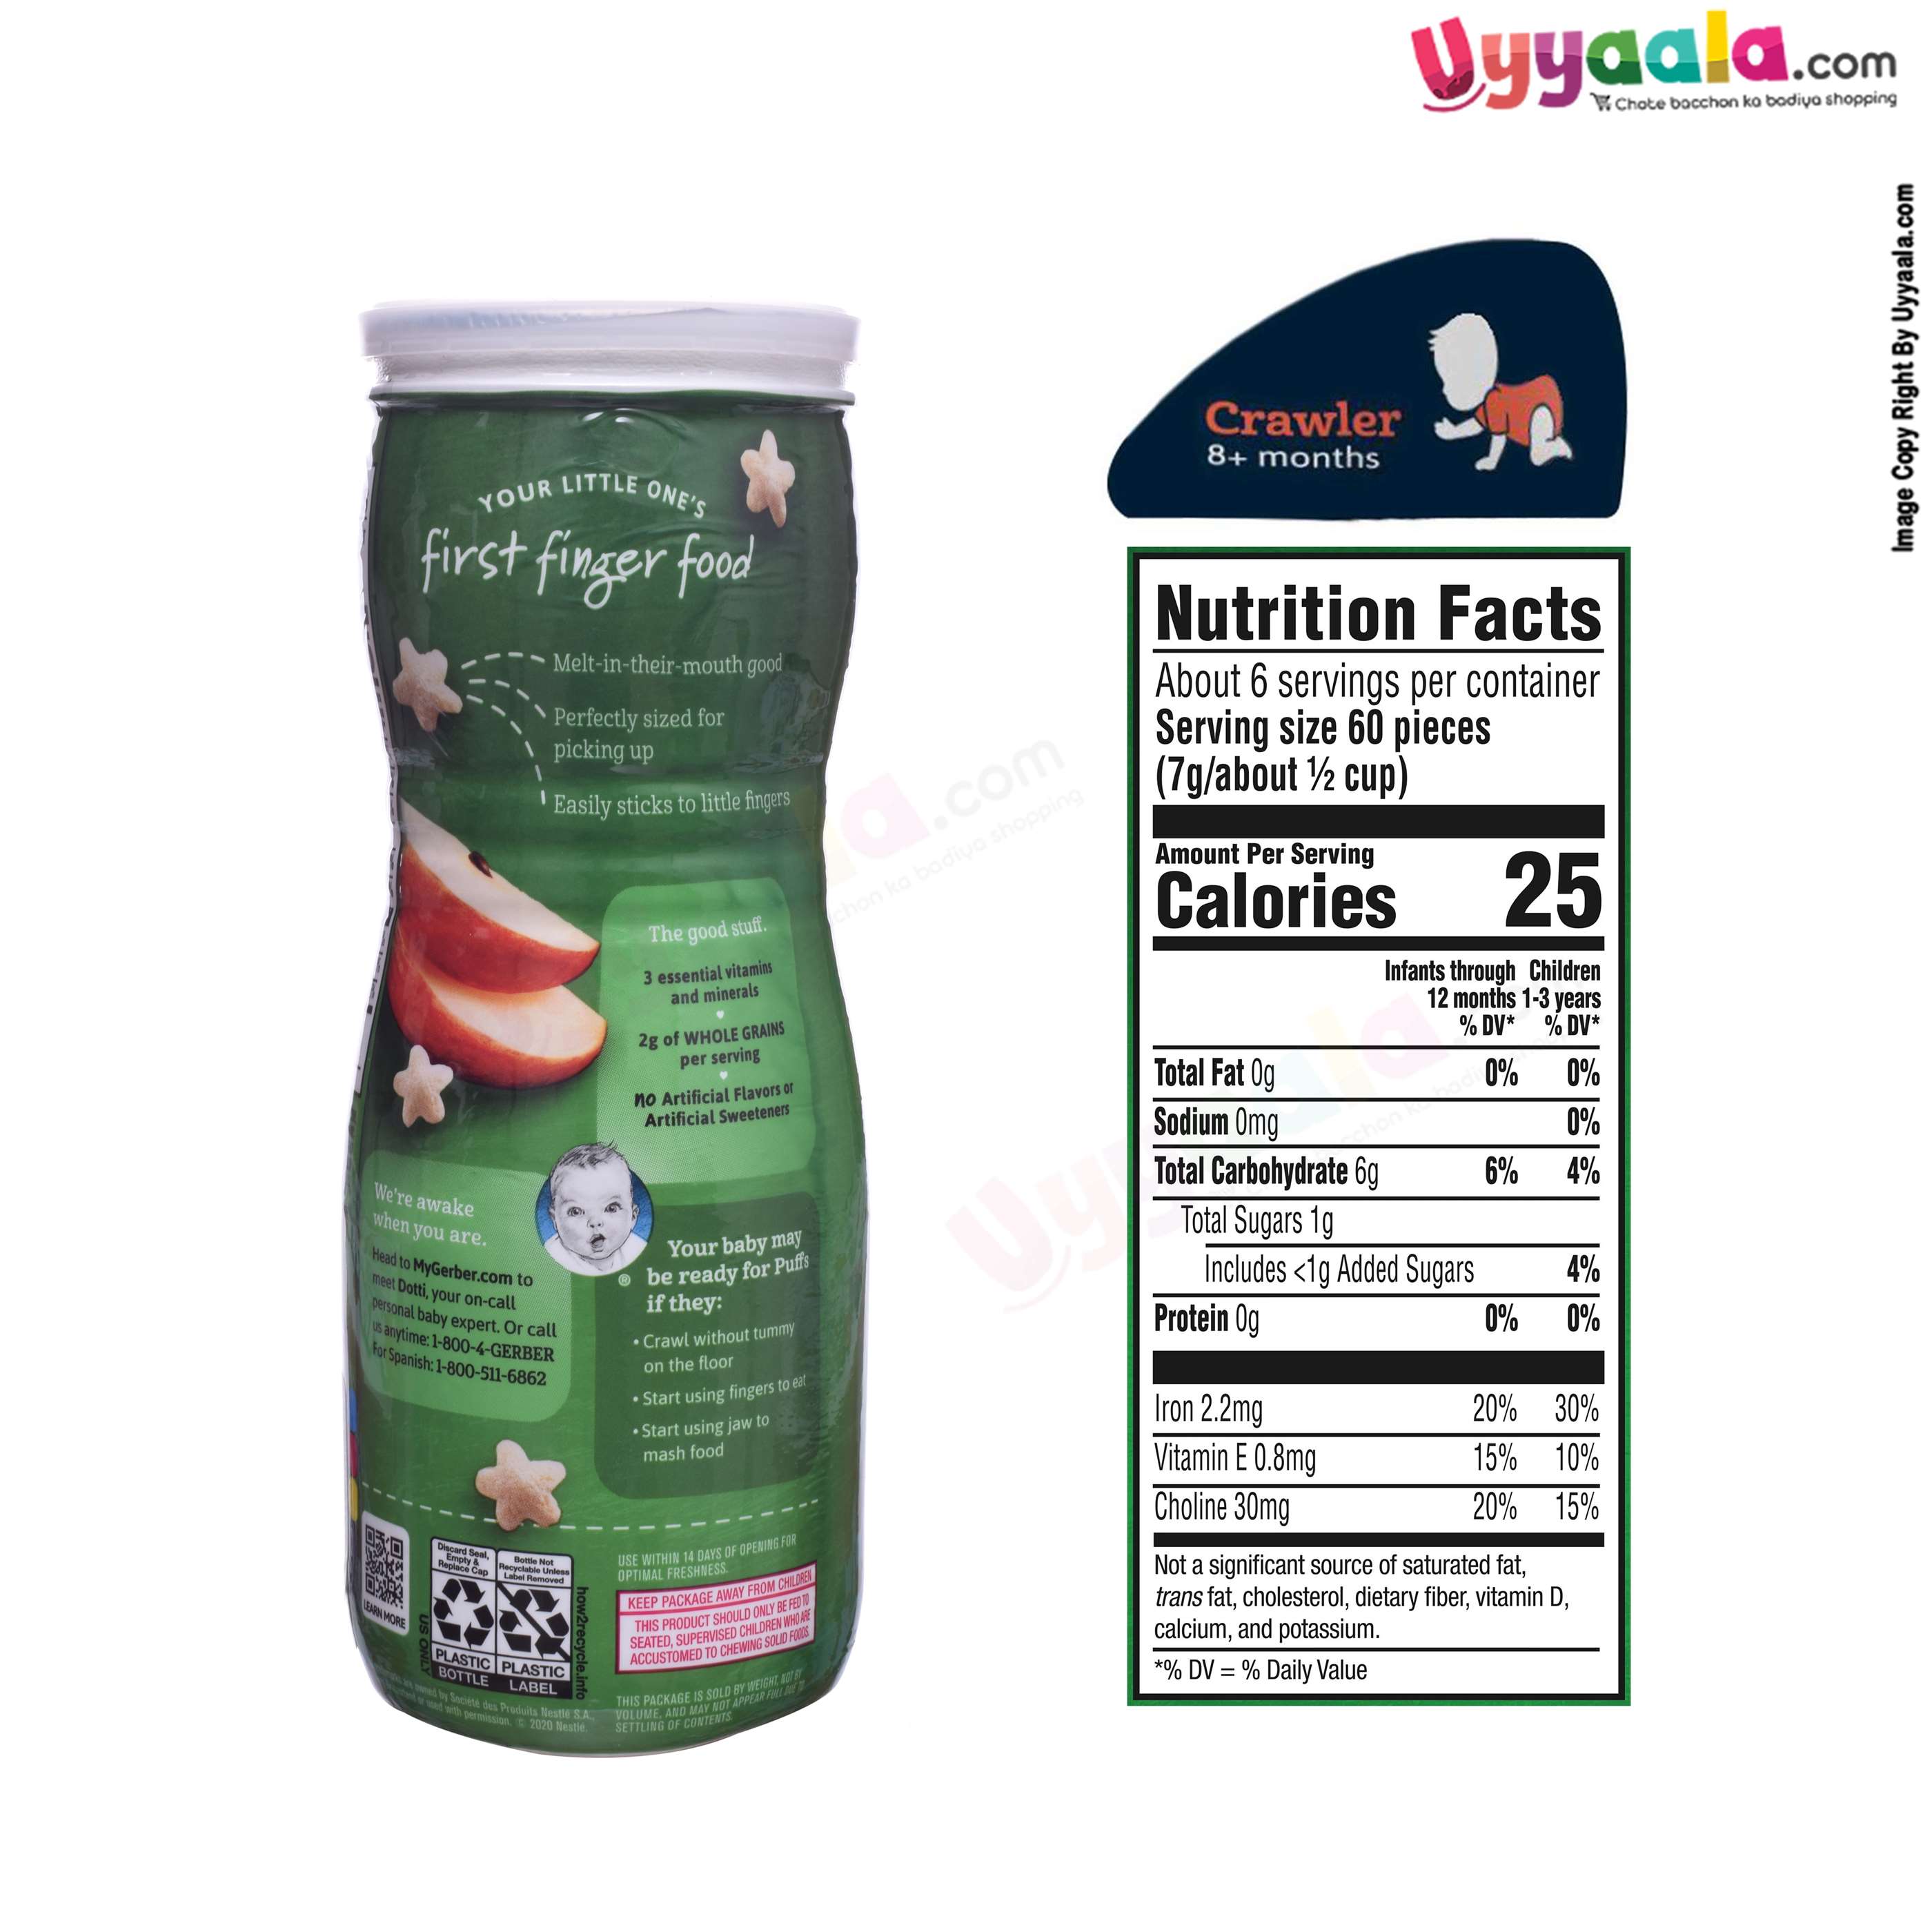 Buy Gerber Grain & Grow Organic Puffs for Babies in Apple flavour - 42gms Online in India at uyyaala.com